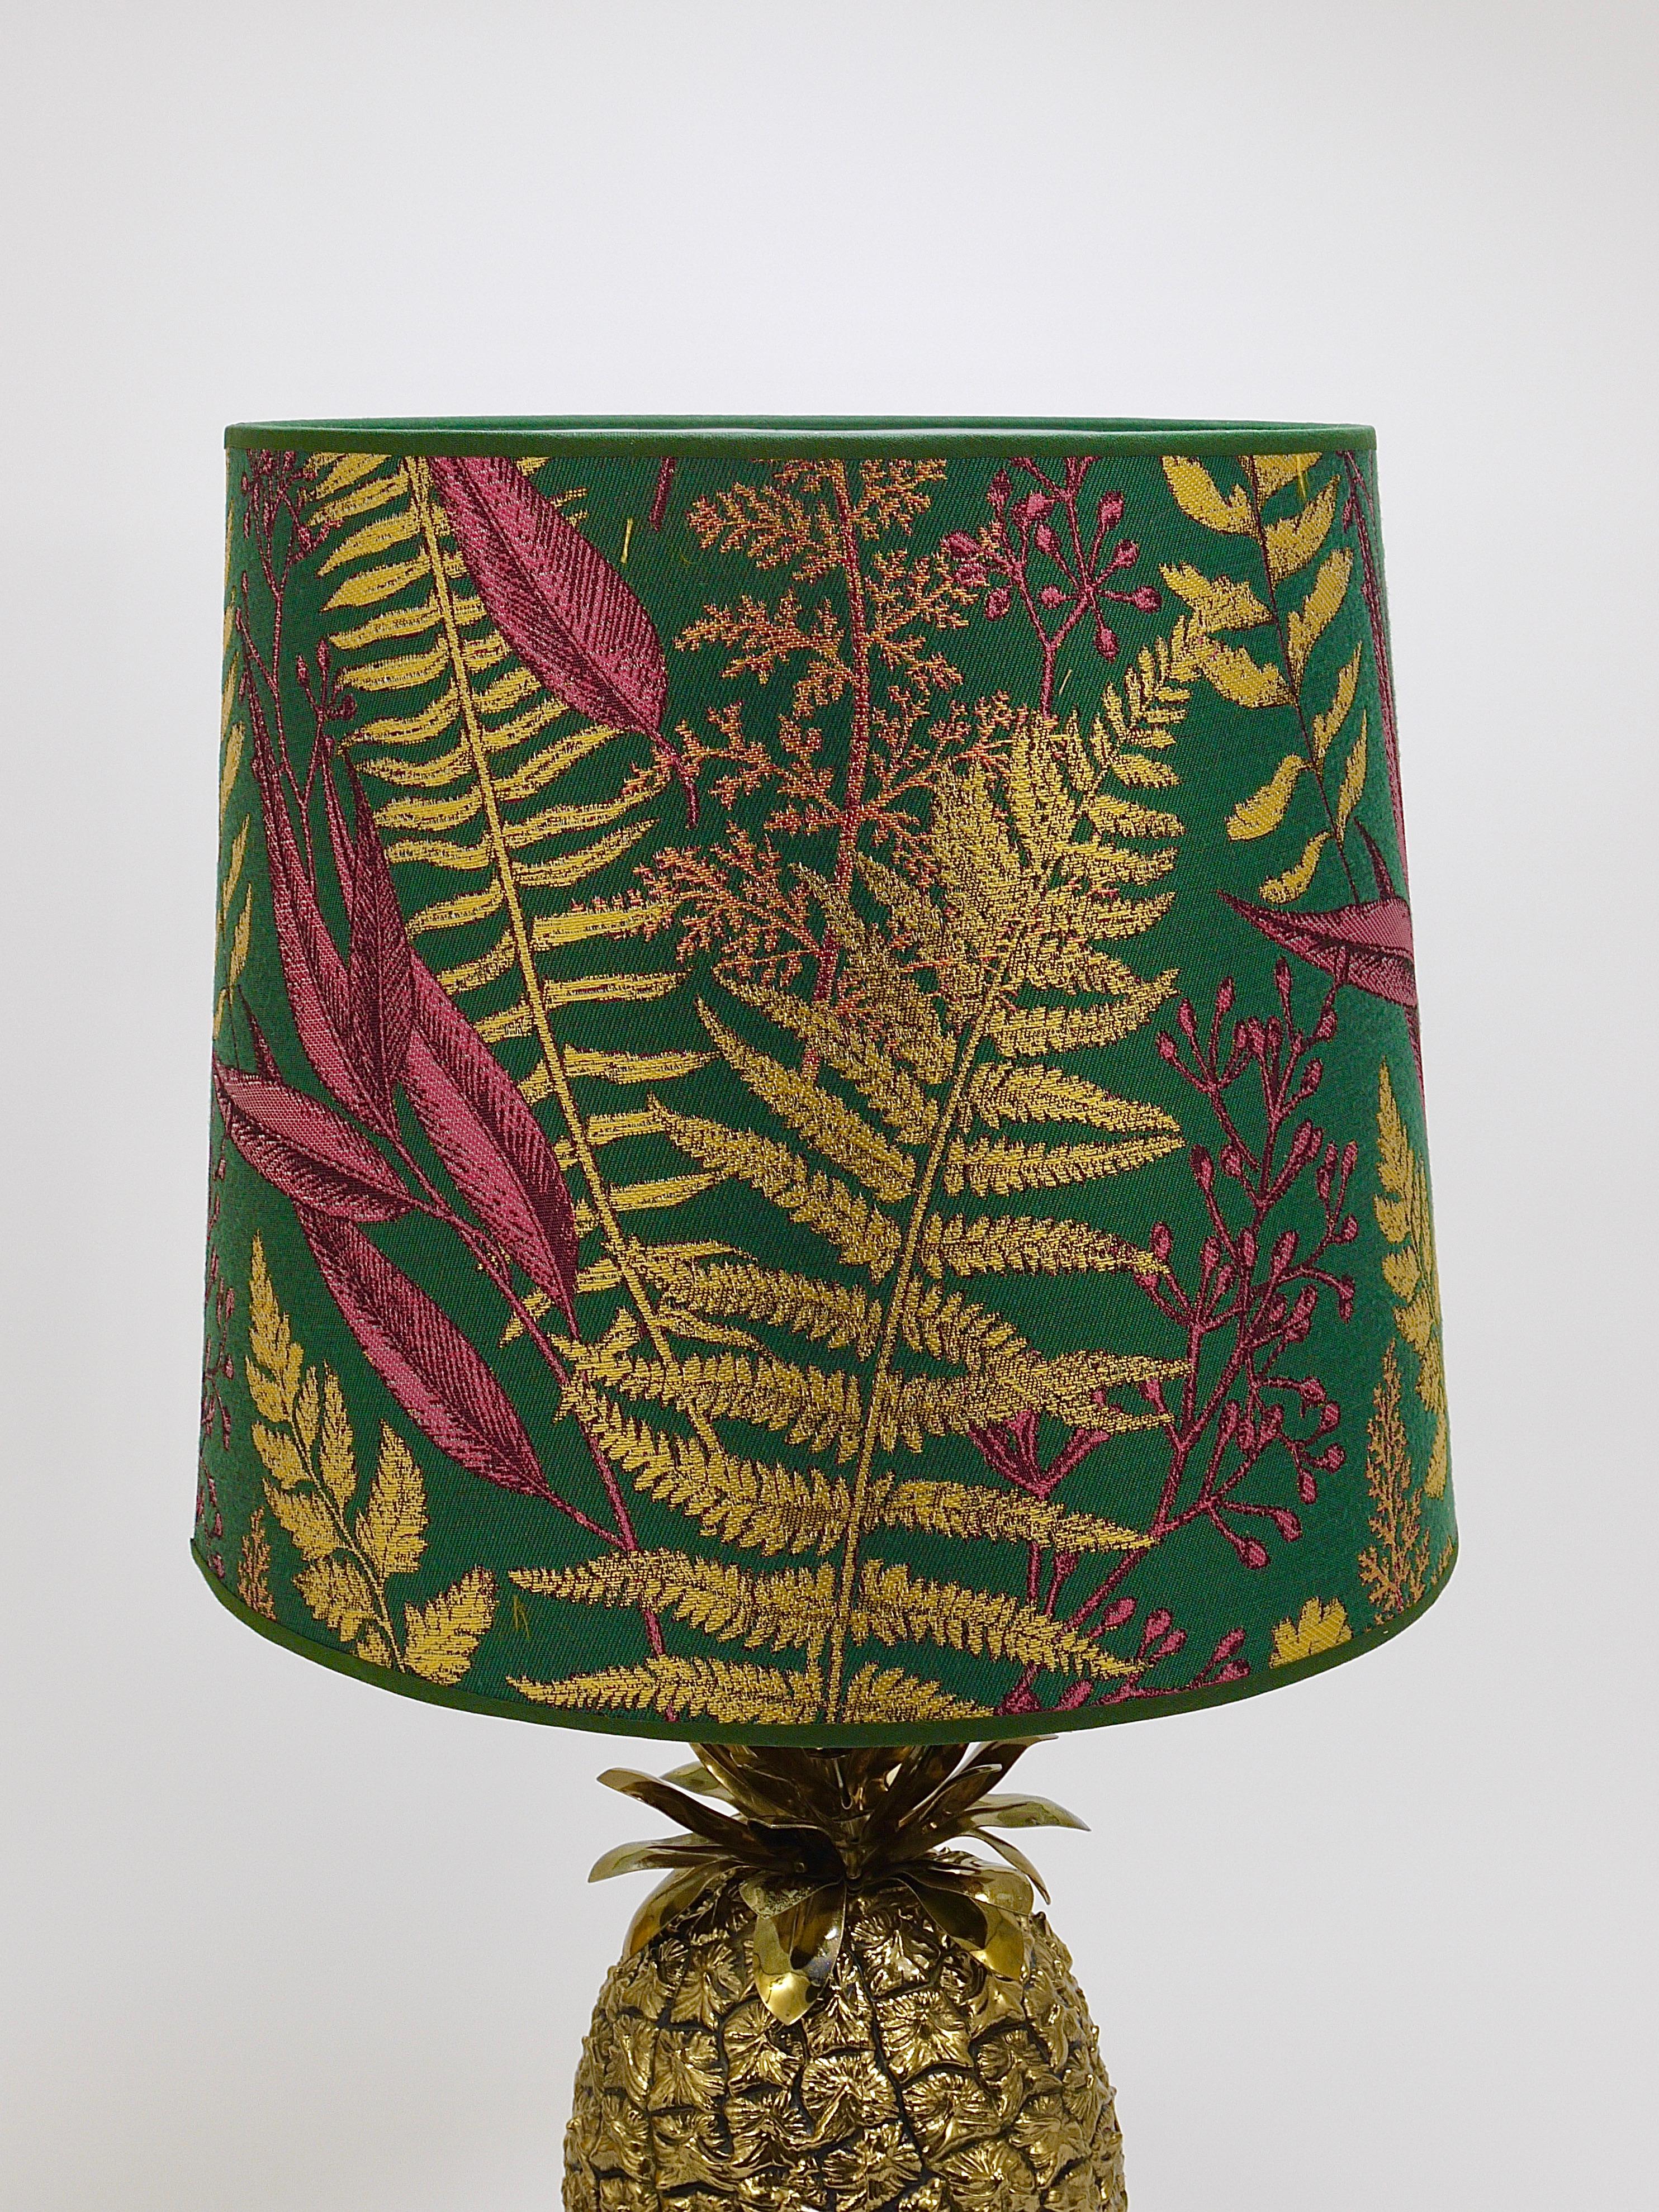 Mauro Manetti Hollywood Regency Pineapple Brass Table Lamp, Italy, 1970s For Sale 3